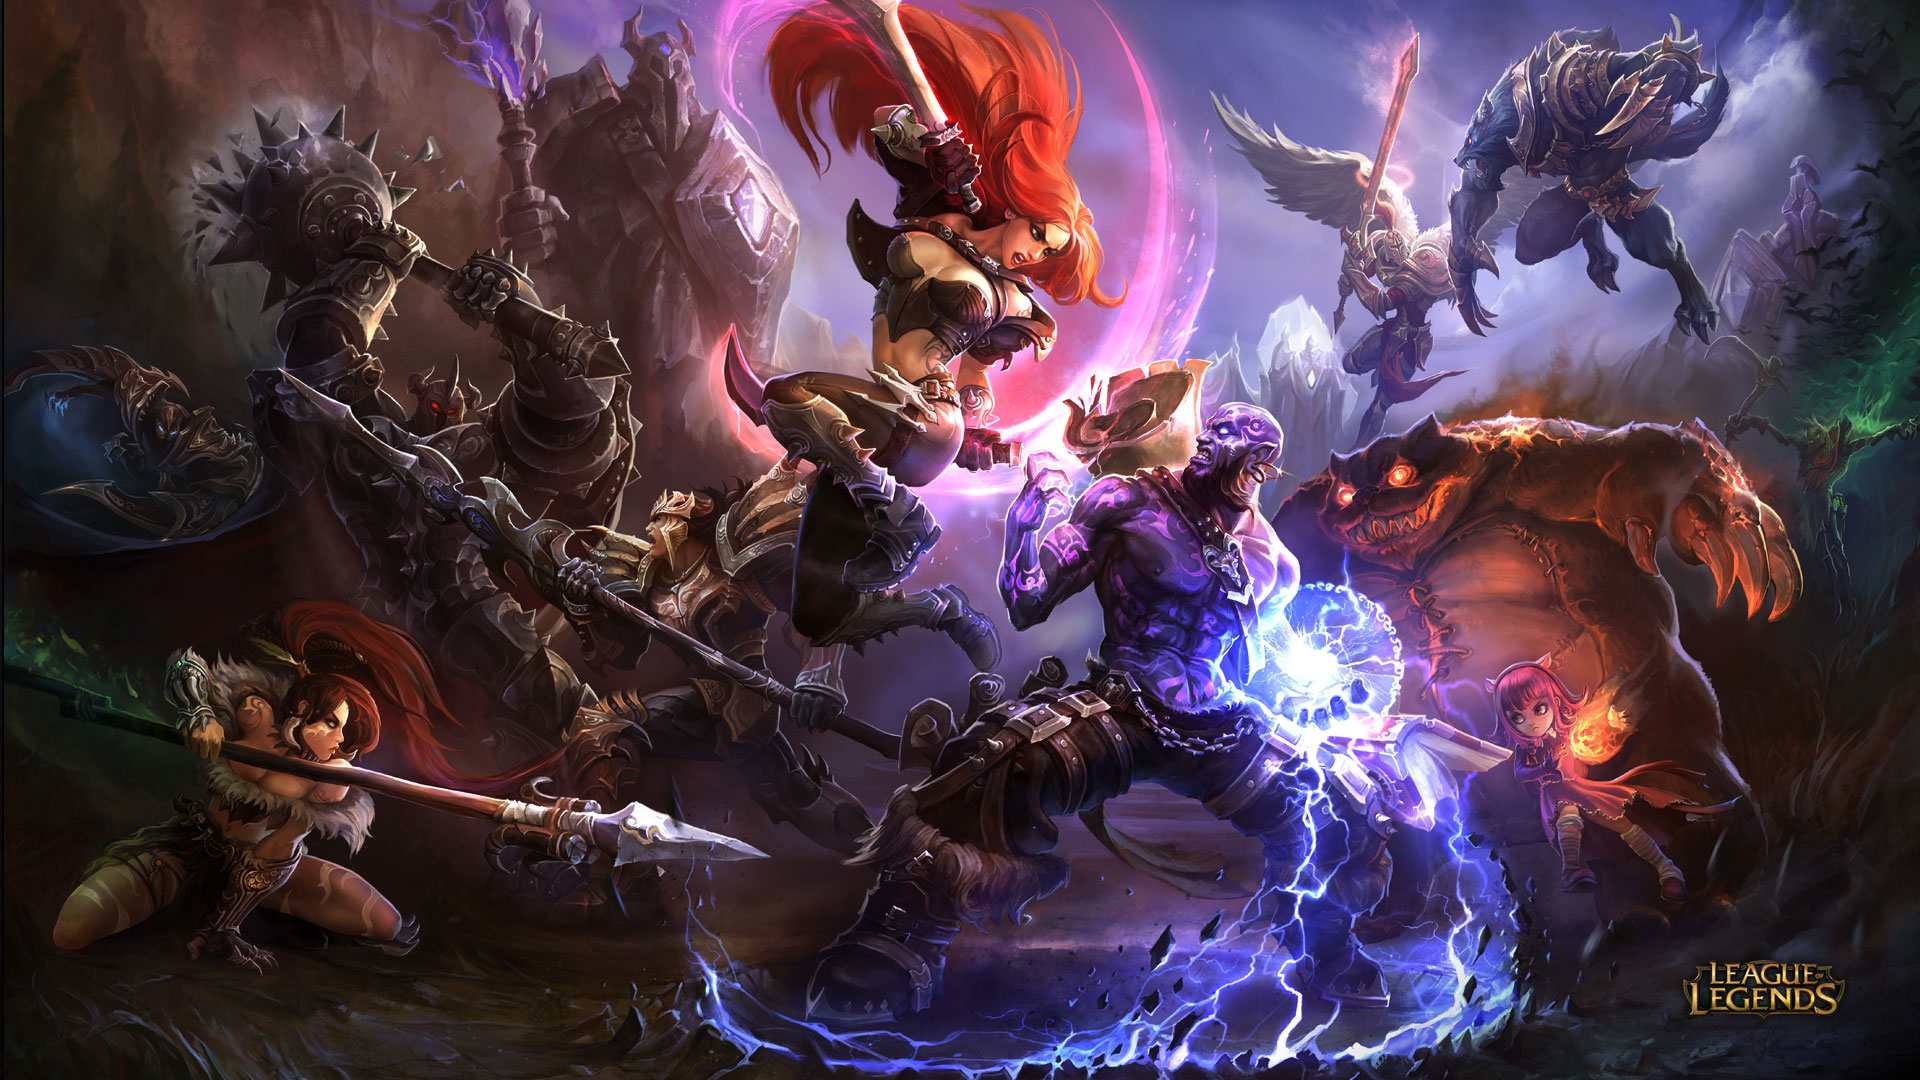 League of Legends Wallpapers from Riot Games Free to Play MOBA